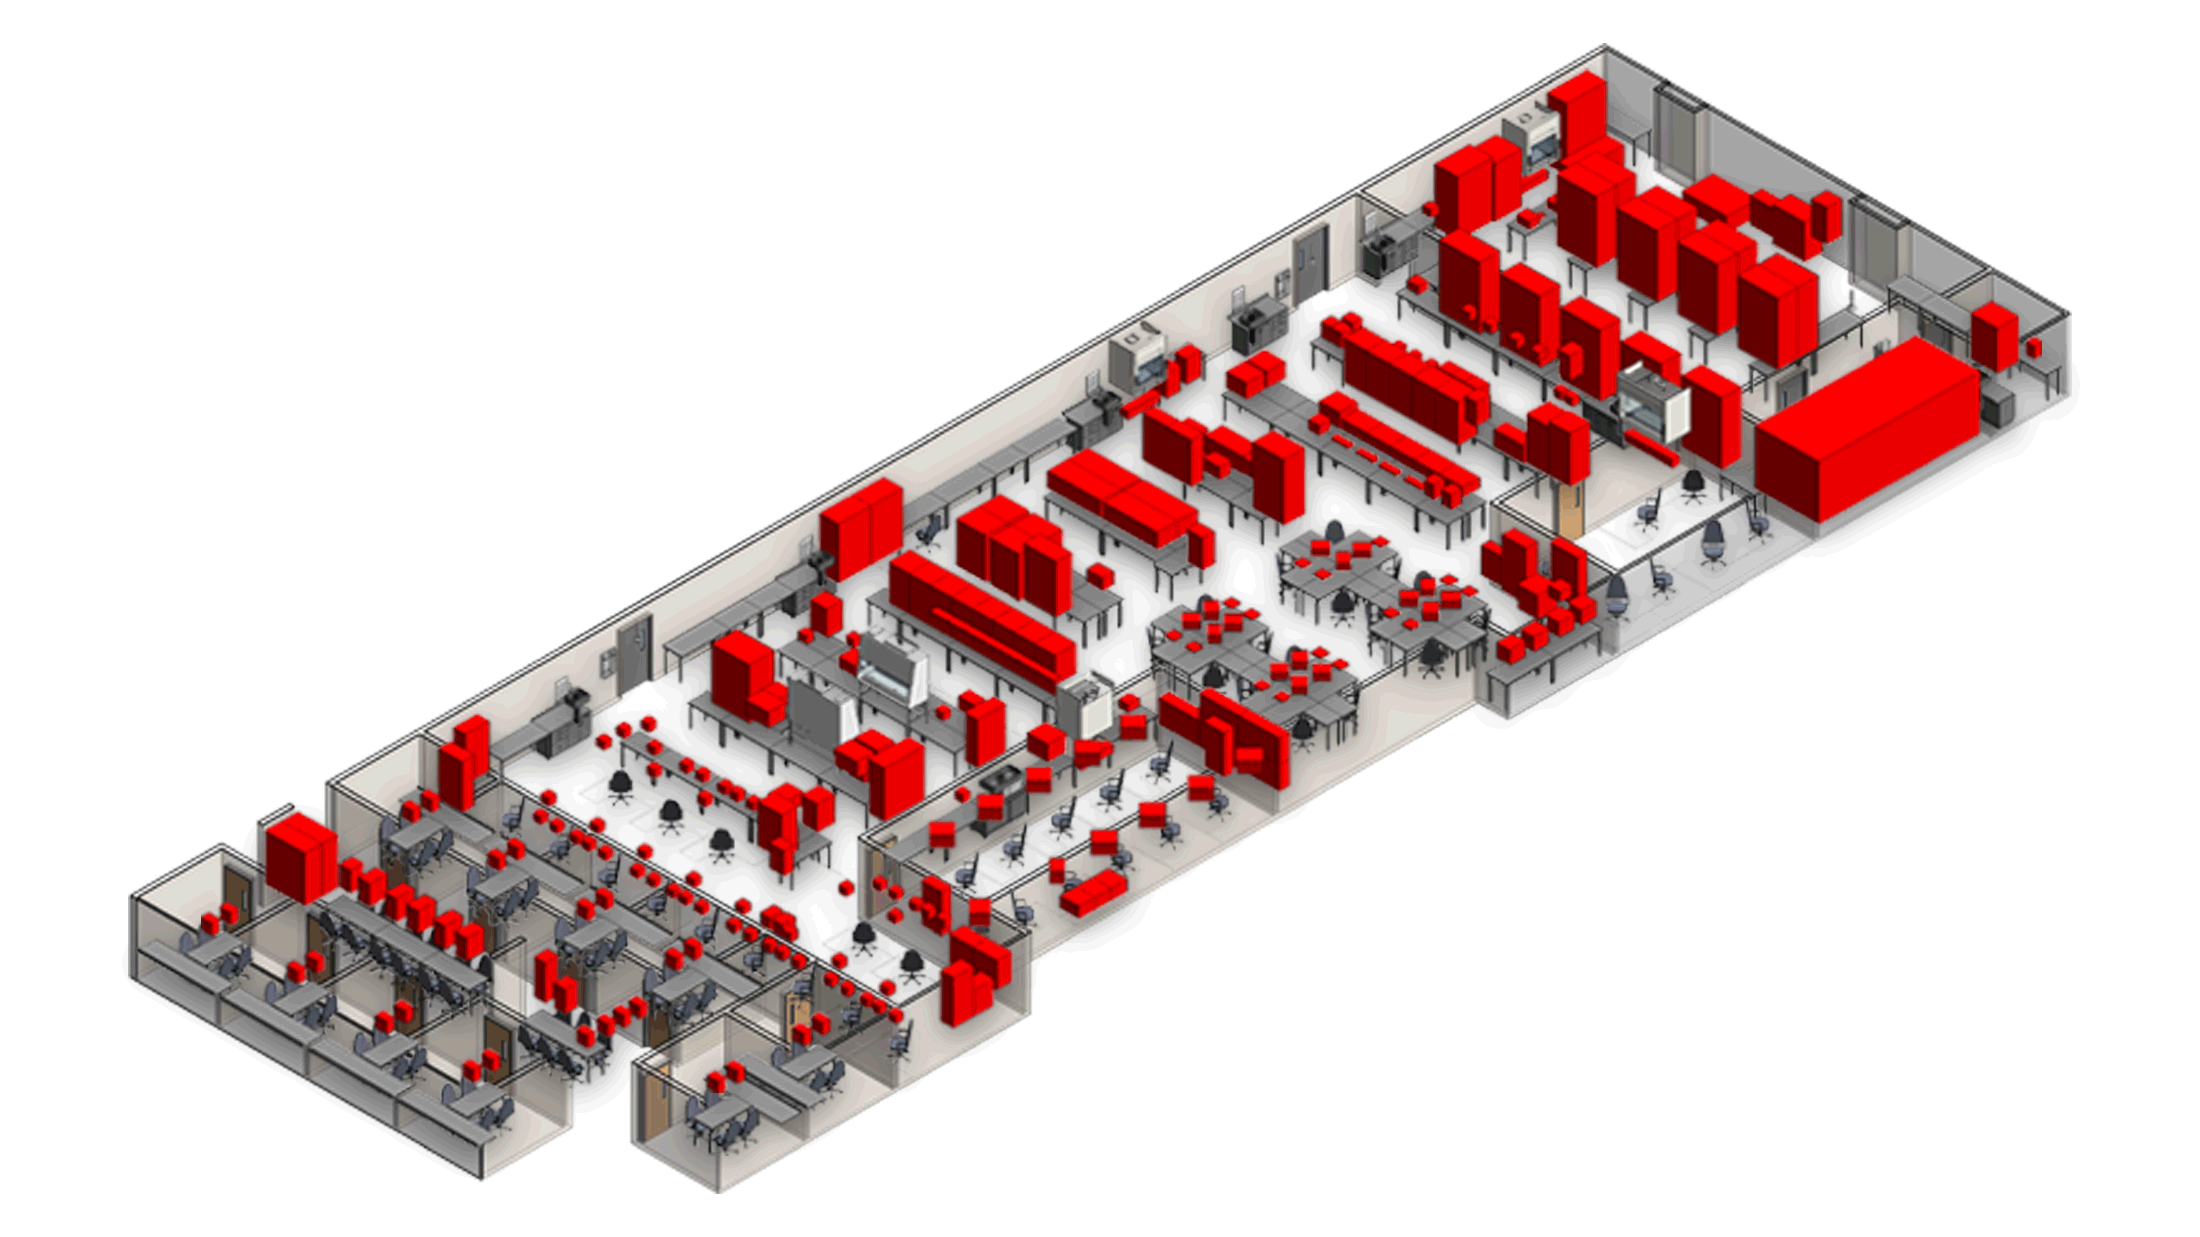 a drawing of an axonometric floor plan of a laboratory building concept with details in red and gray